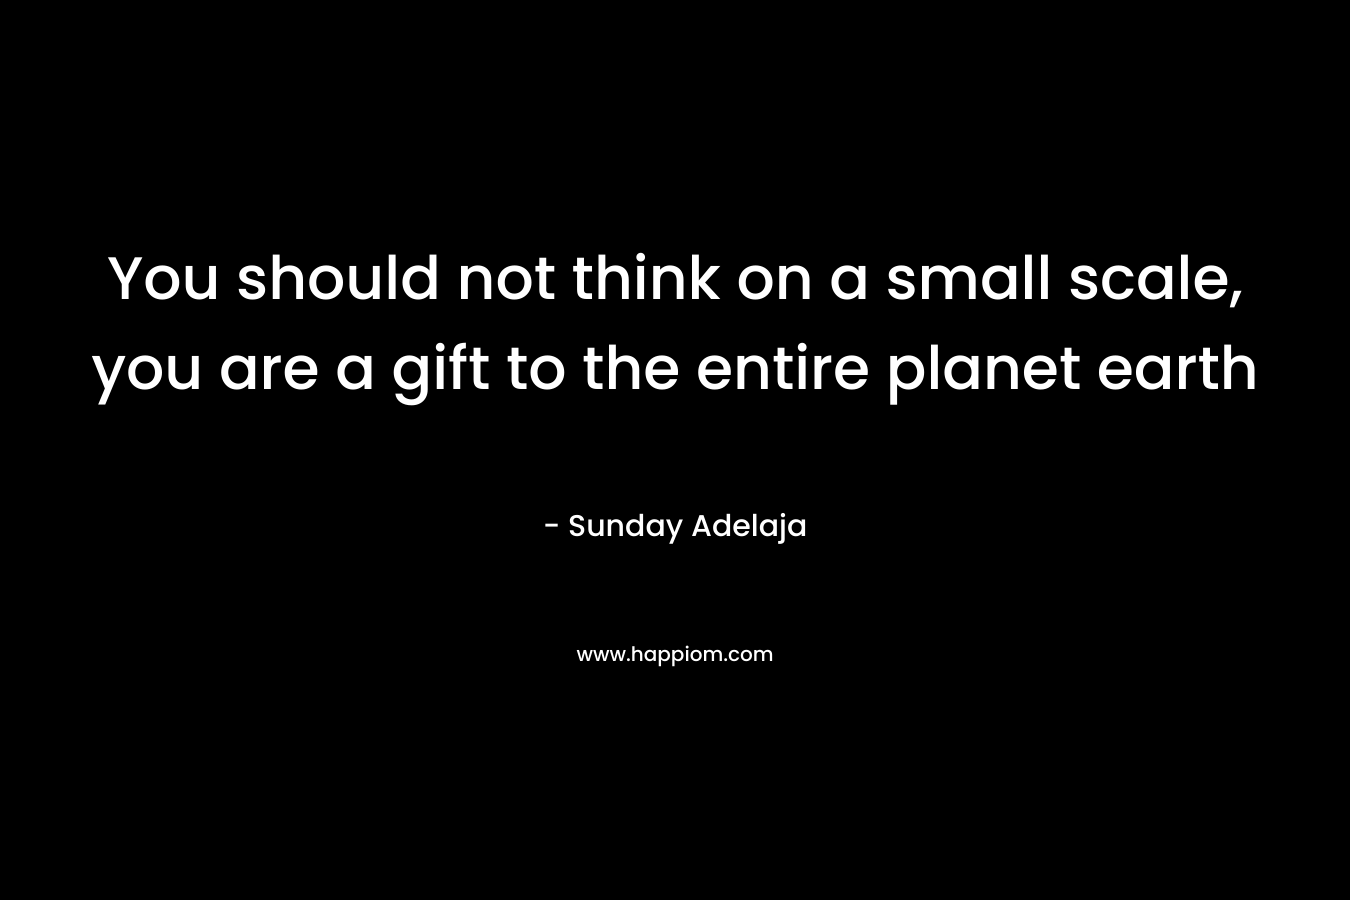 You should not think on a small scale, you are a gift to the entire planet earth